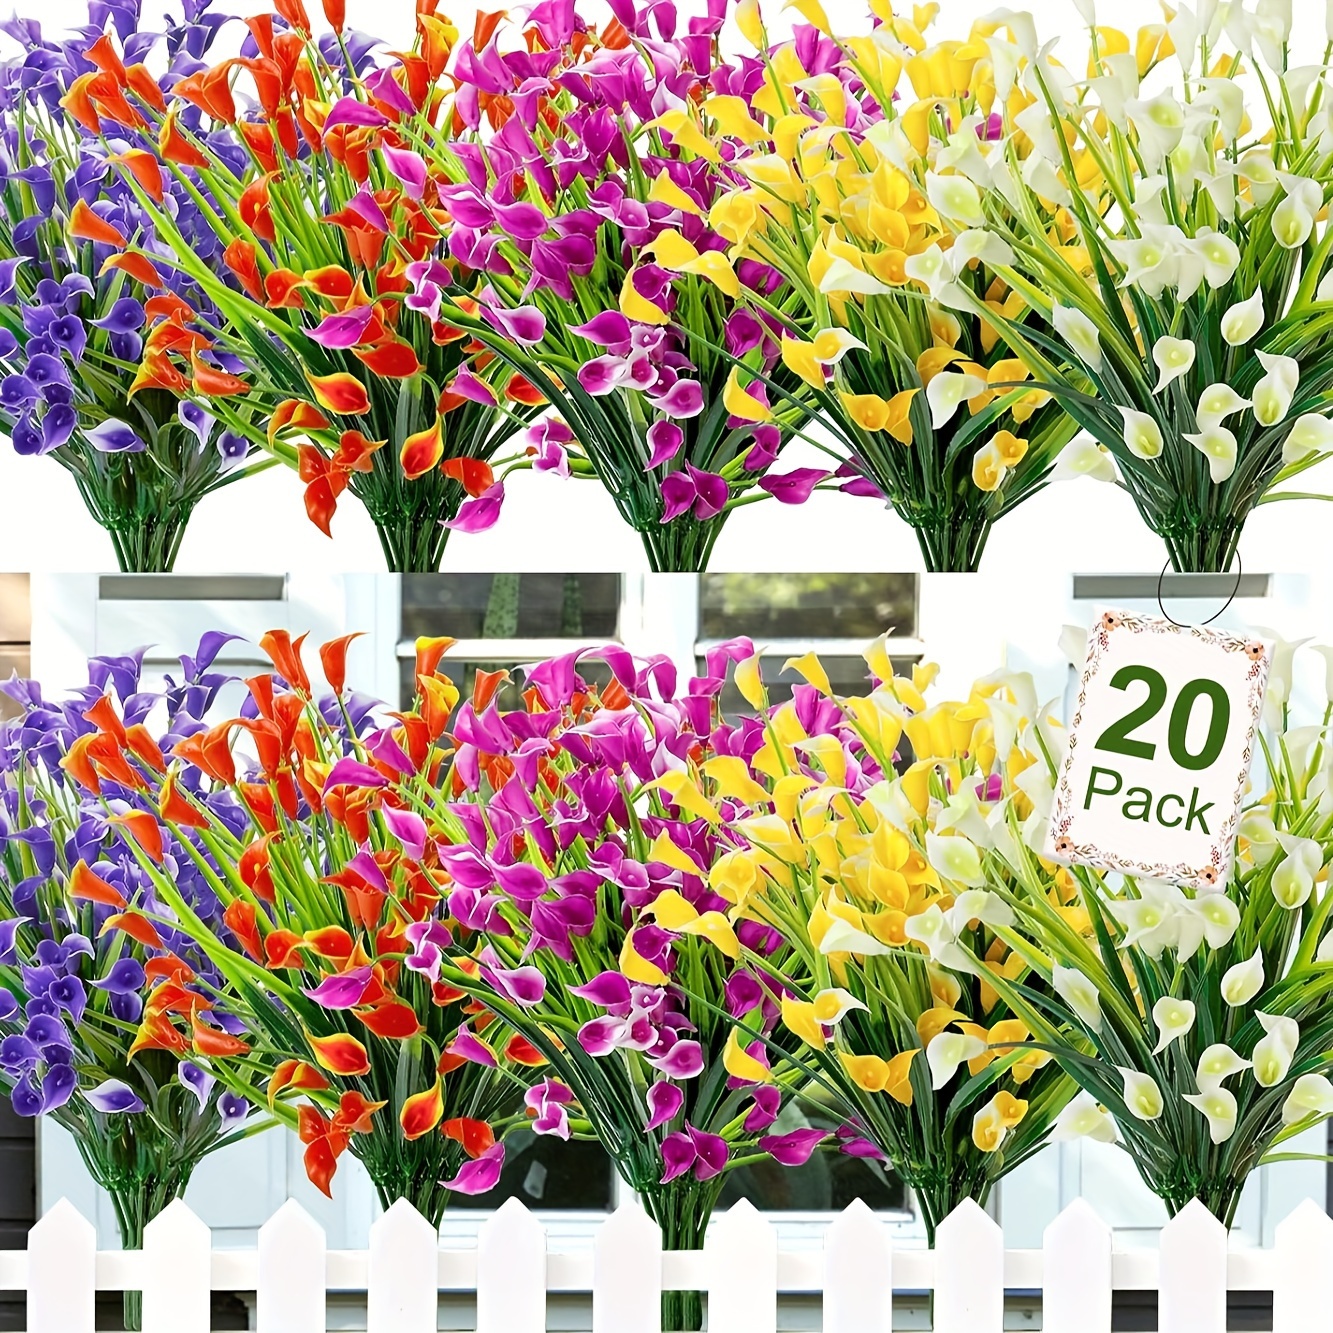 

20 Bundles Of Outdoor Artificial Flowers, Fake Calla Lilies, Artificial Plastic Plants, Uv-resistant Summer Flowers, Garden Porch, Courtyard, Office Window Frame, Table, Home Decoration